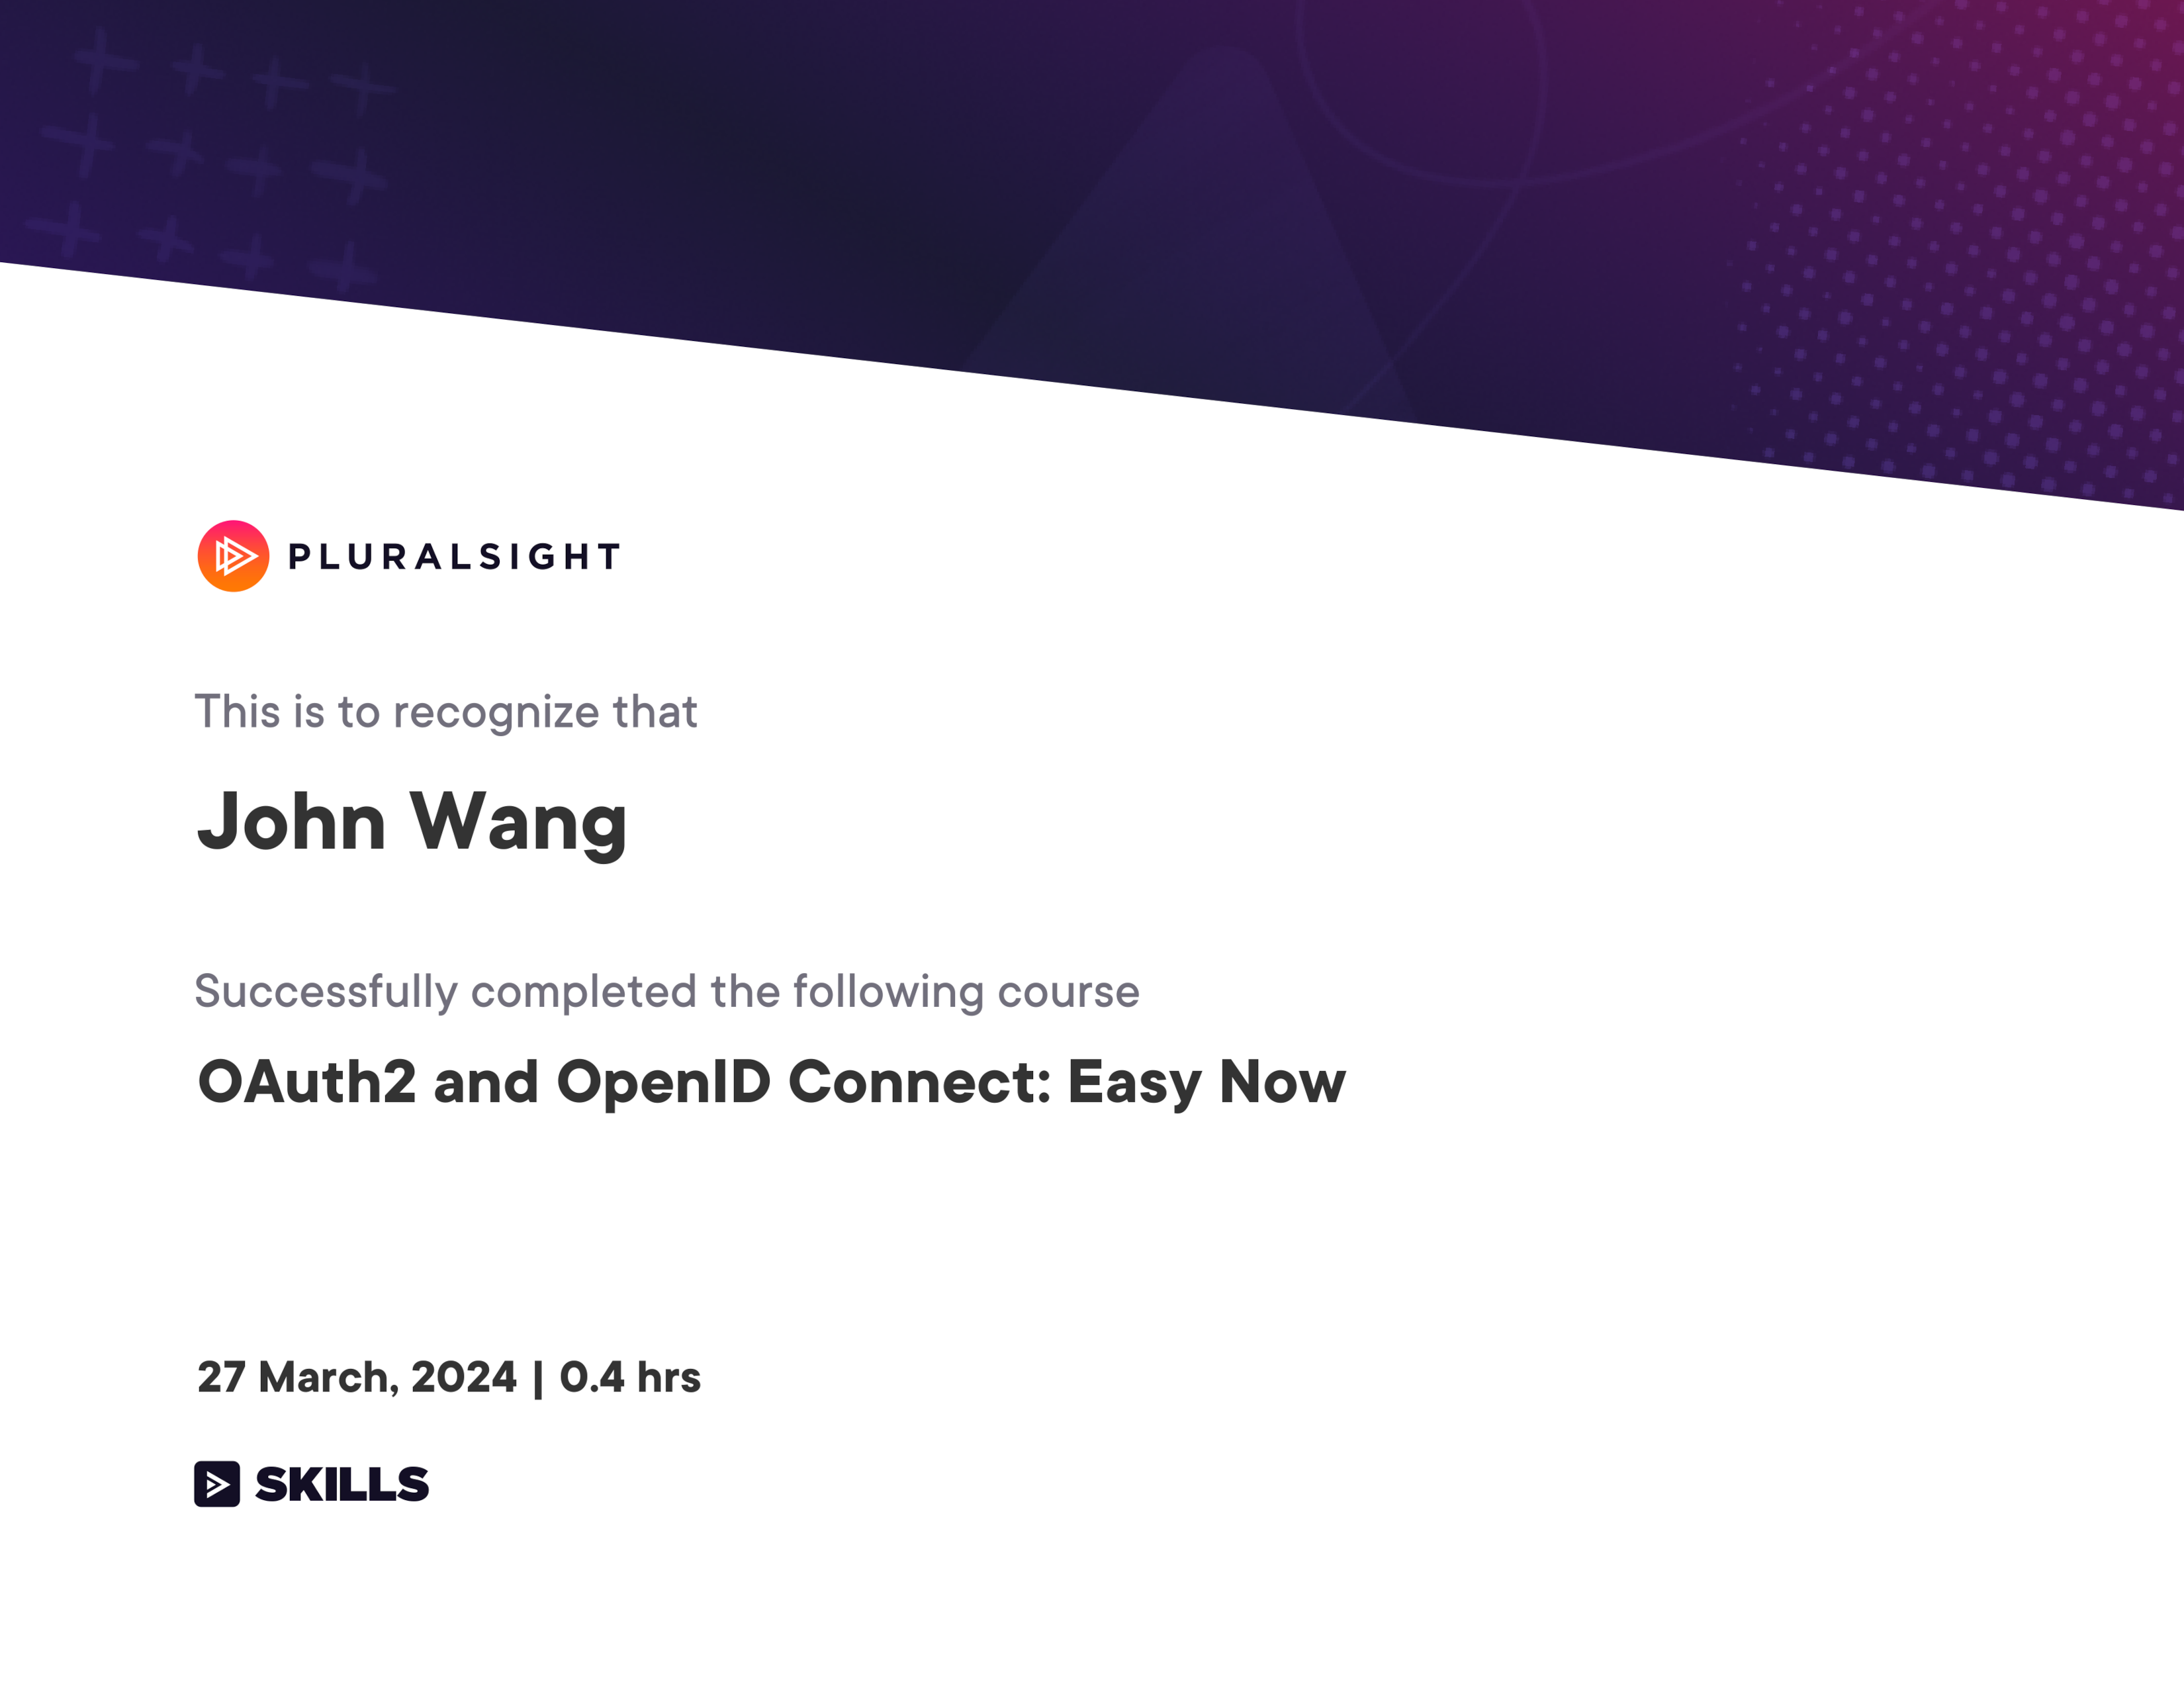 John's OAuth2 and OpenID Connect: Easy Now from Pluralsight by Roland Guijt